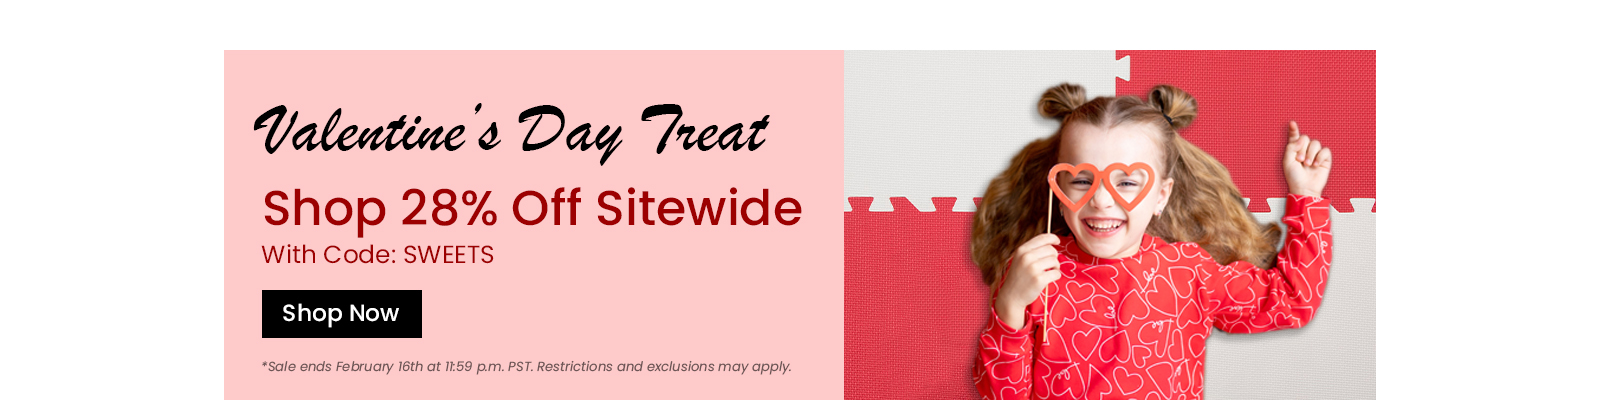 Valentines Day Treat. Shop 28 percent off sitewide with code SWEETS. Shop Now. Sale ends February 16th. Restrctions and exclusions may apply